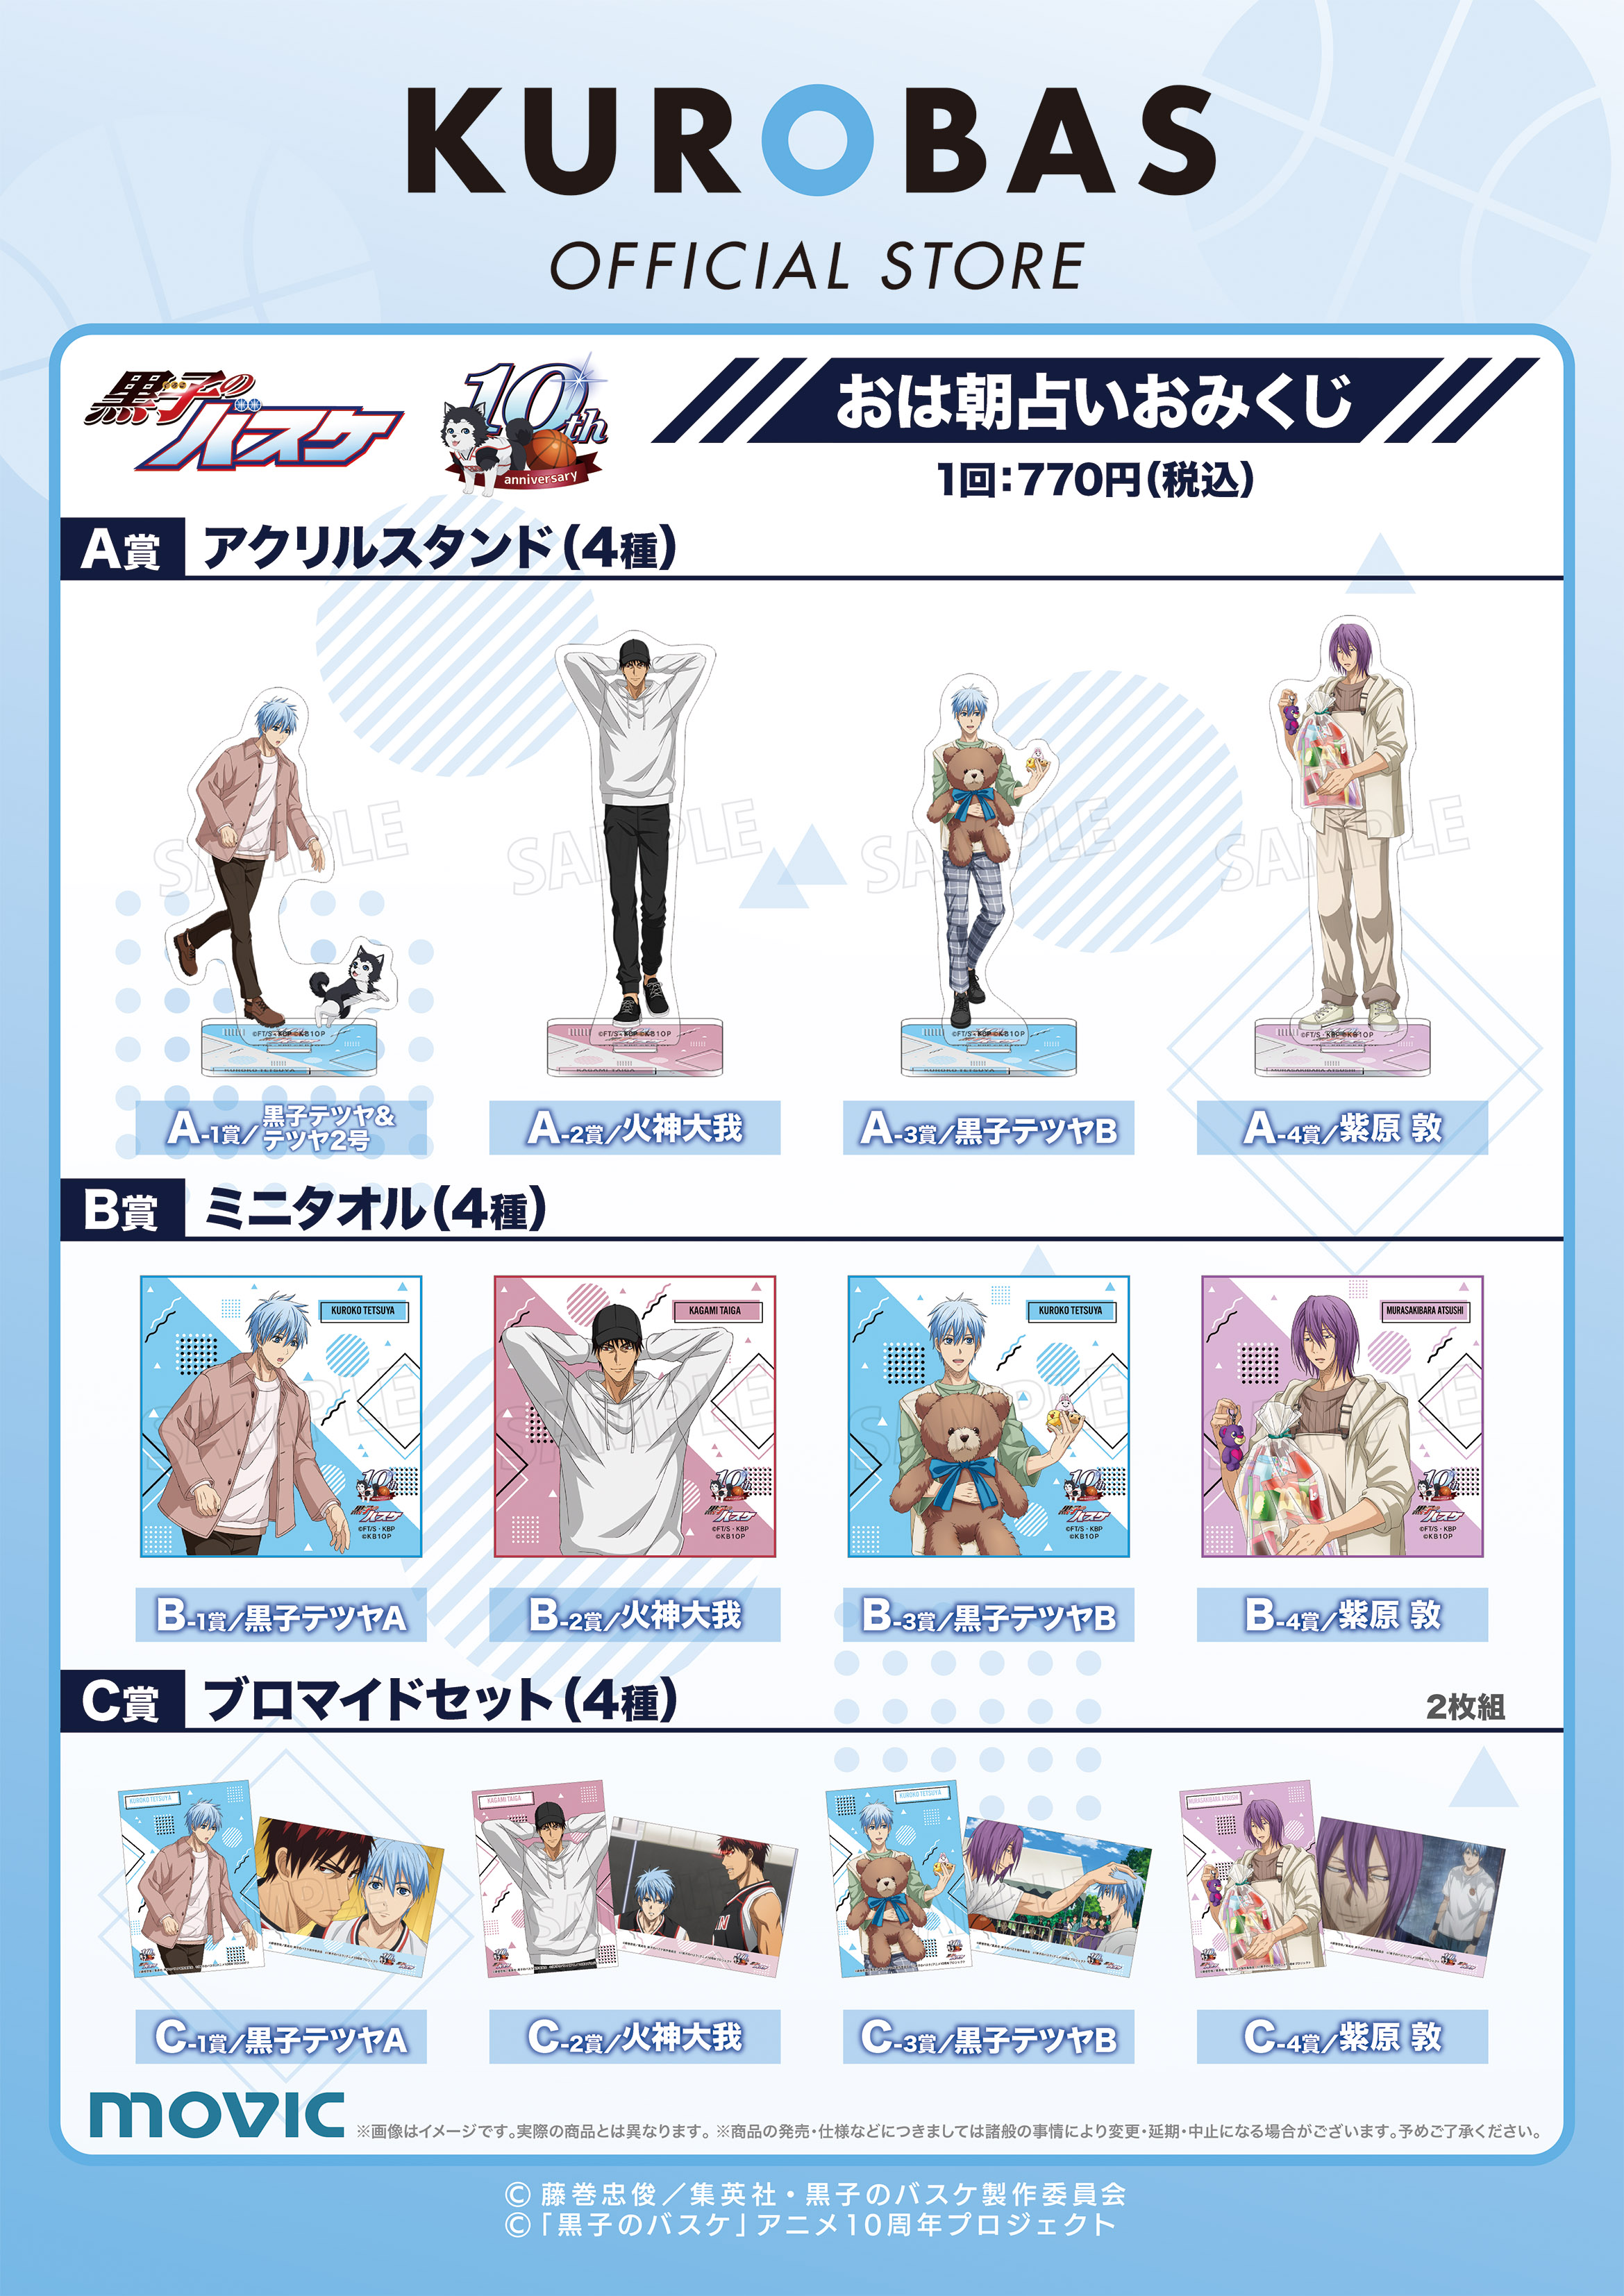 KUROBAS OFFICIAL STORE on X: 